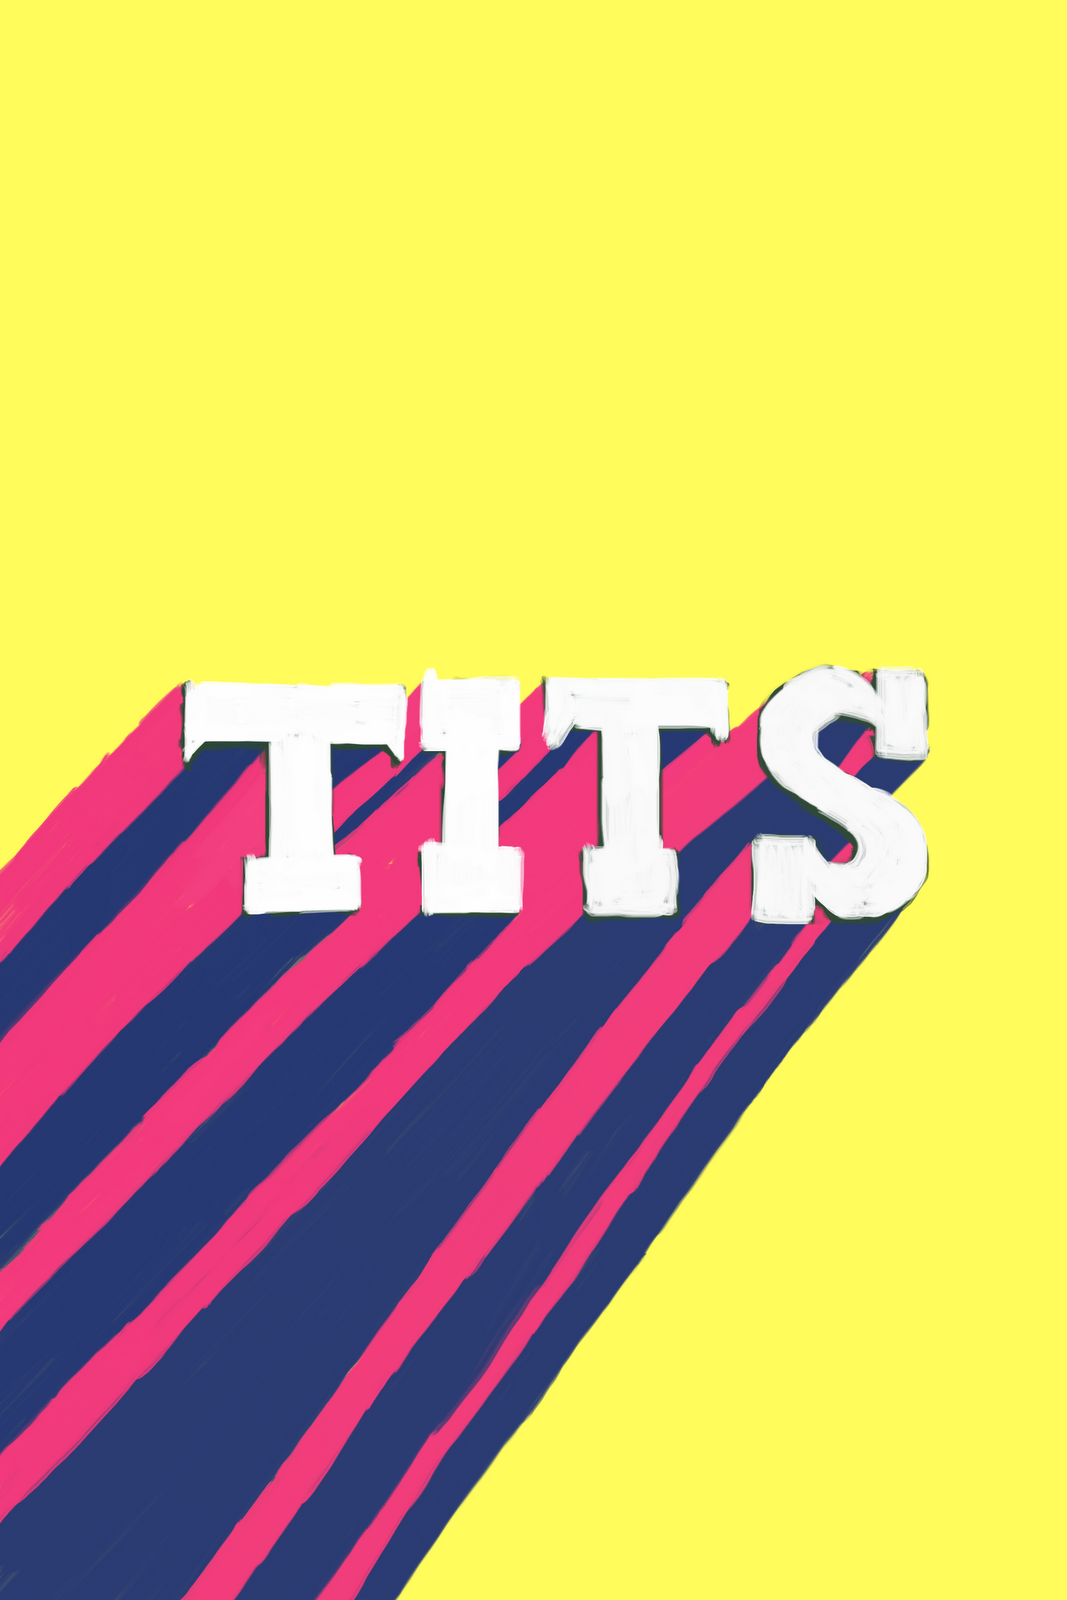 This is how I use “tits”